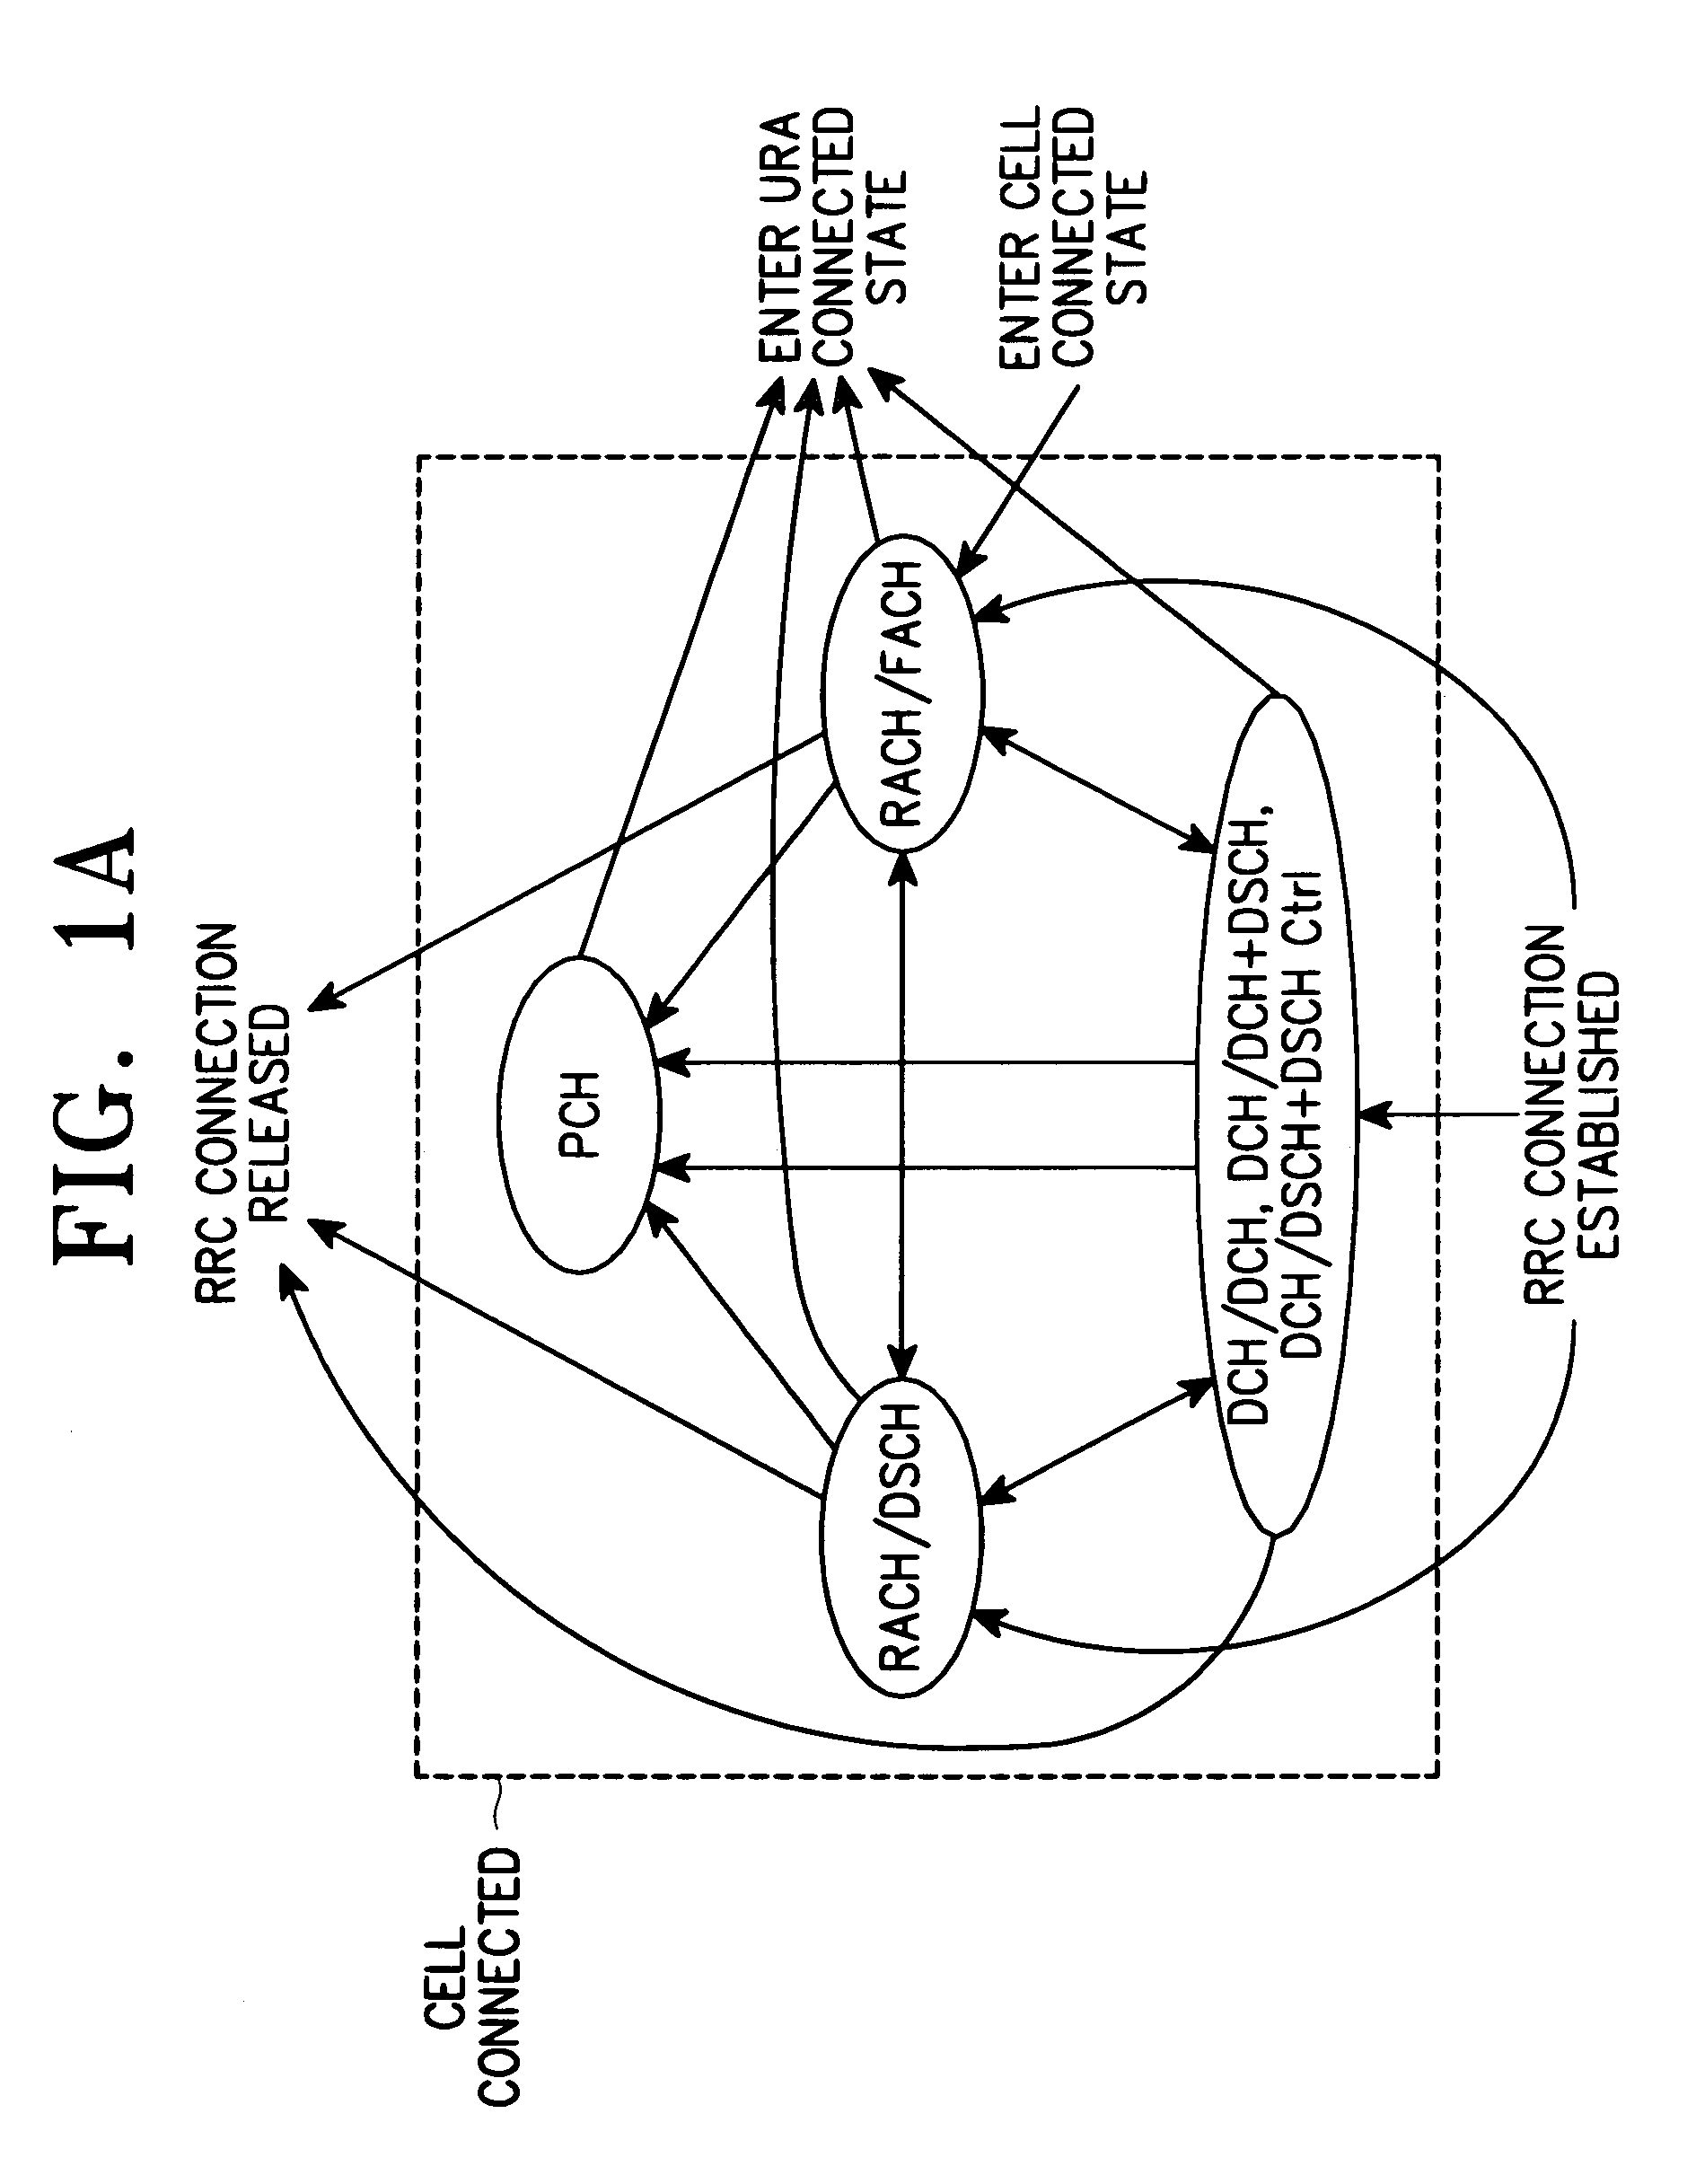 Apparatus and method for gating data on a control channel in a CDMA communication system